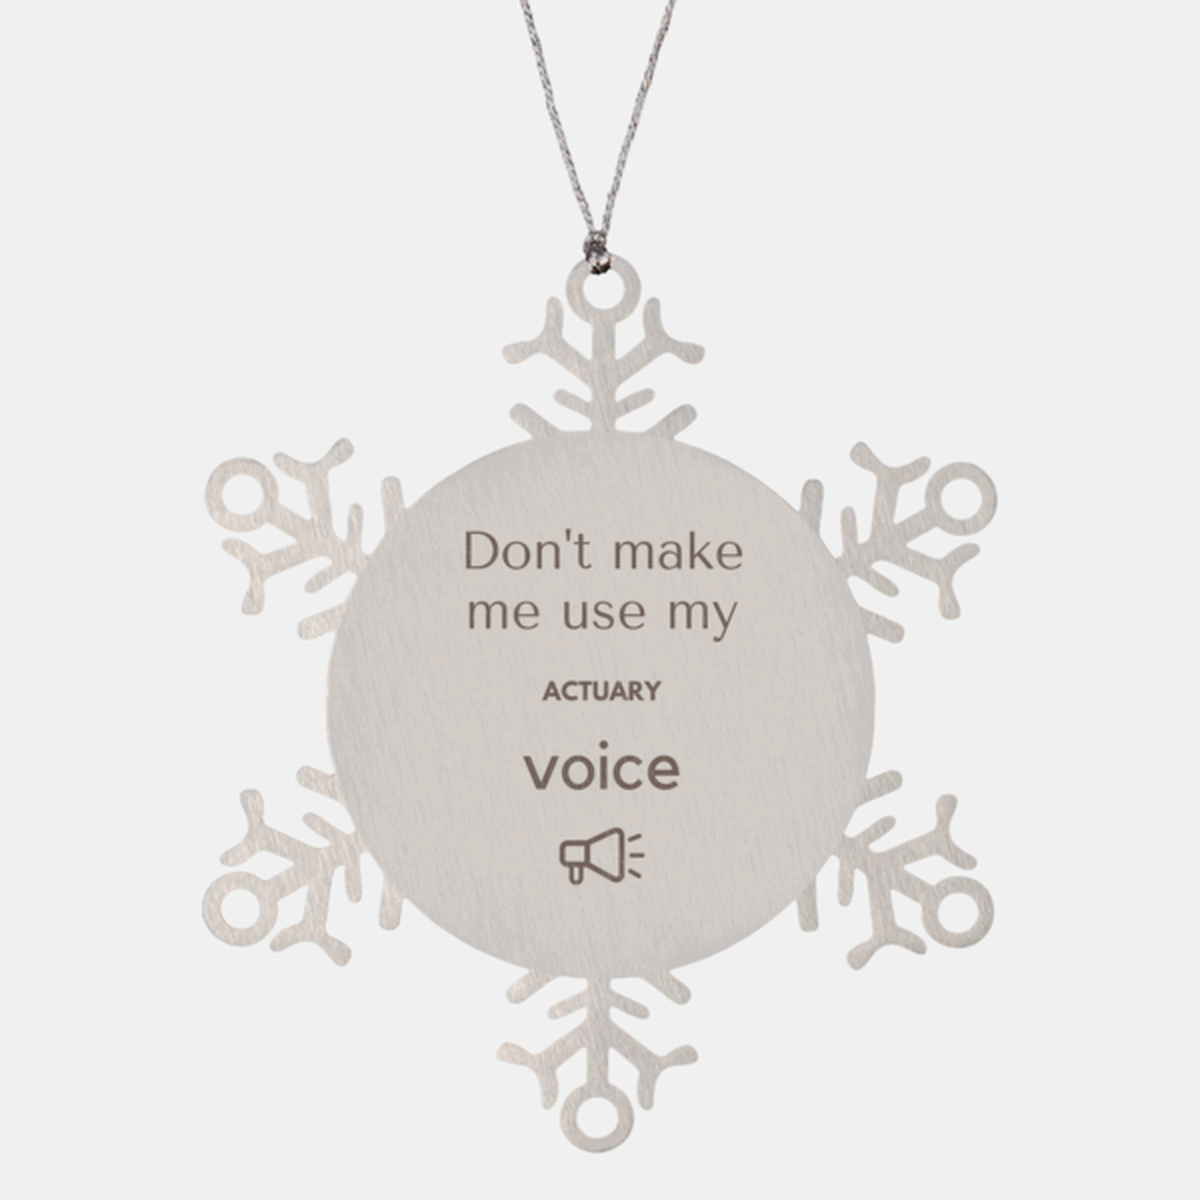 Don't make me use my Actuary voice, Sarcasm Actuary Ornament Gifts, Christmas Actuary Snowflake Ornament Unique Gifts For Actuary Coworkers, Men, Women, Colleague, Friends